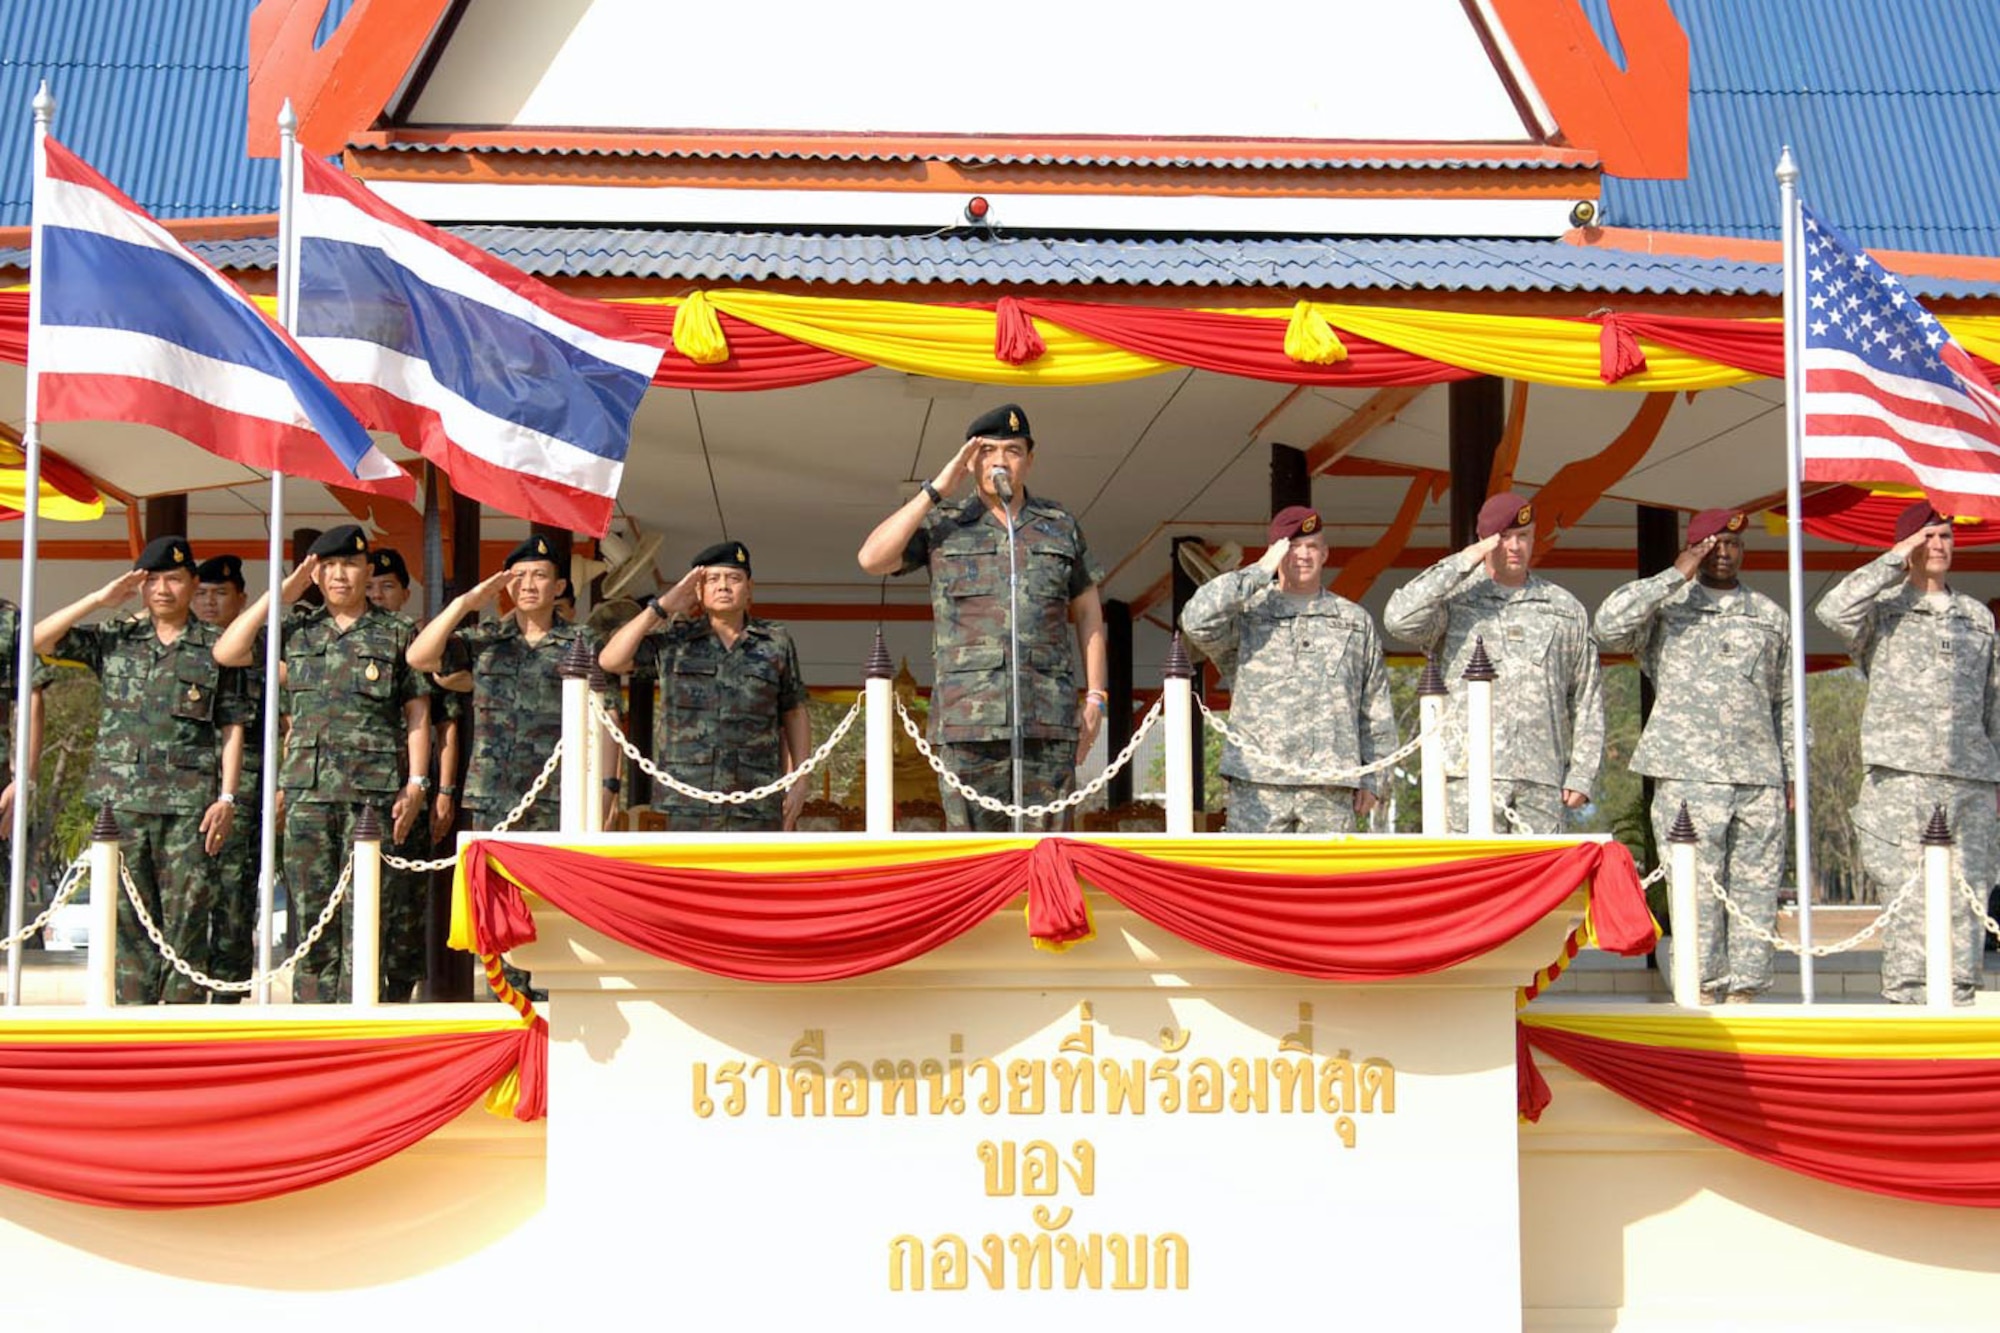 The Thai and U.S. command elements present arms along with Maj. Gen. Kampanart Ruthdit, the commanding general of the Royal Thai Army’s 1st Division, during the Feb. 17 closing ceremony of Exercise Cobra Gold 2011. (U.S. Army  photo/Staff Sgt. Matthew E. Winstead)